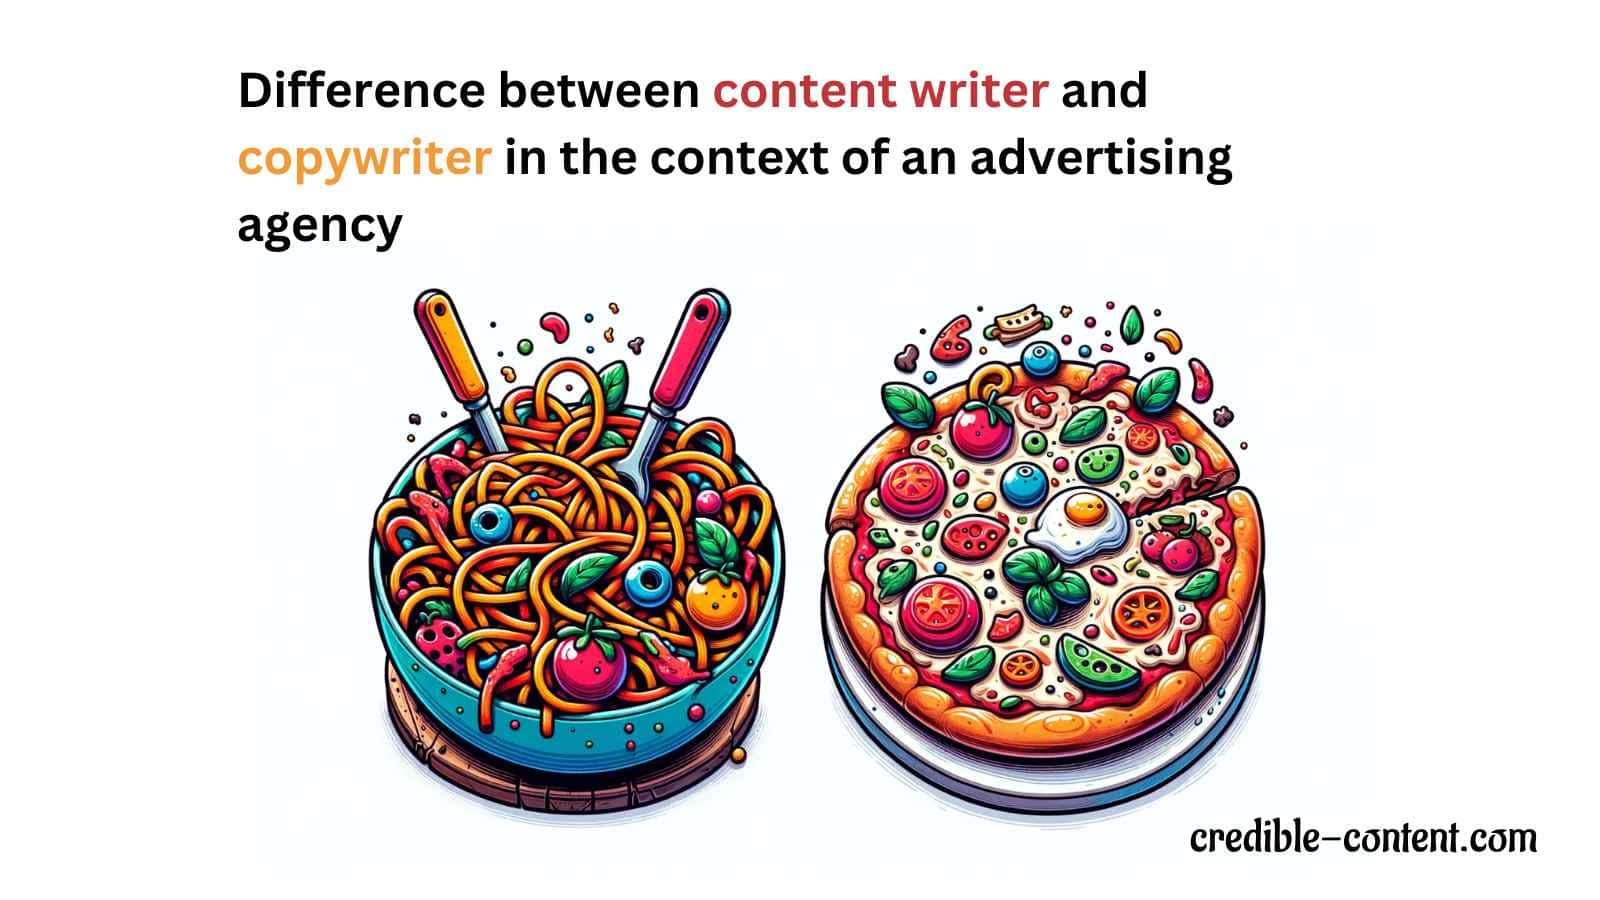 Difference between content writer and copywriter in the context of an advertising agency